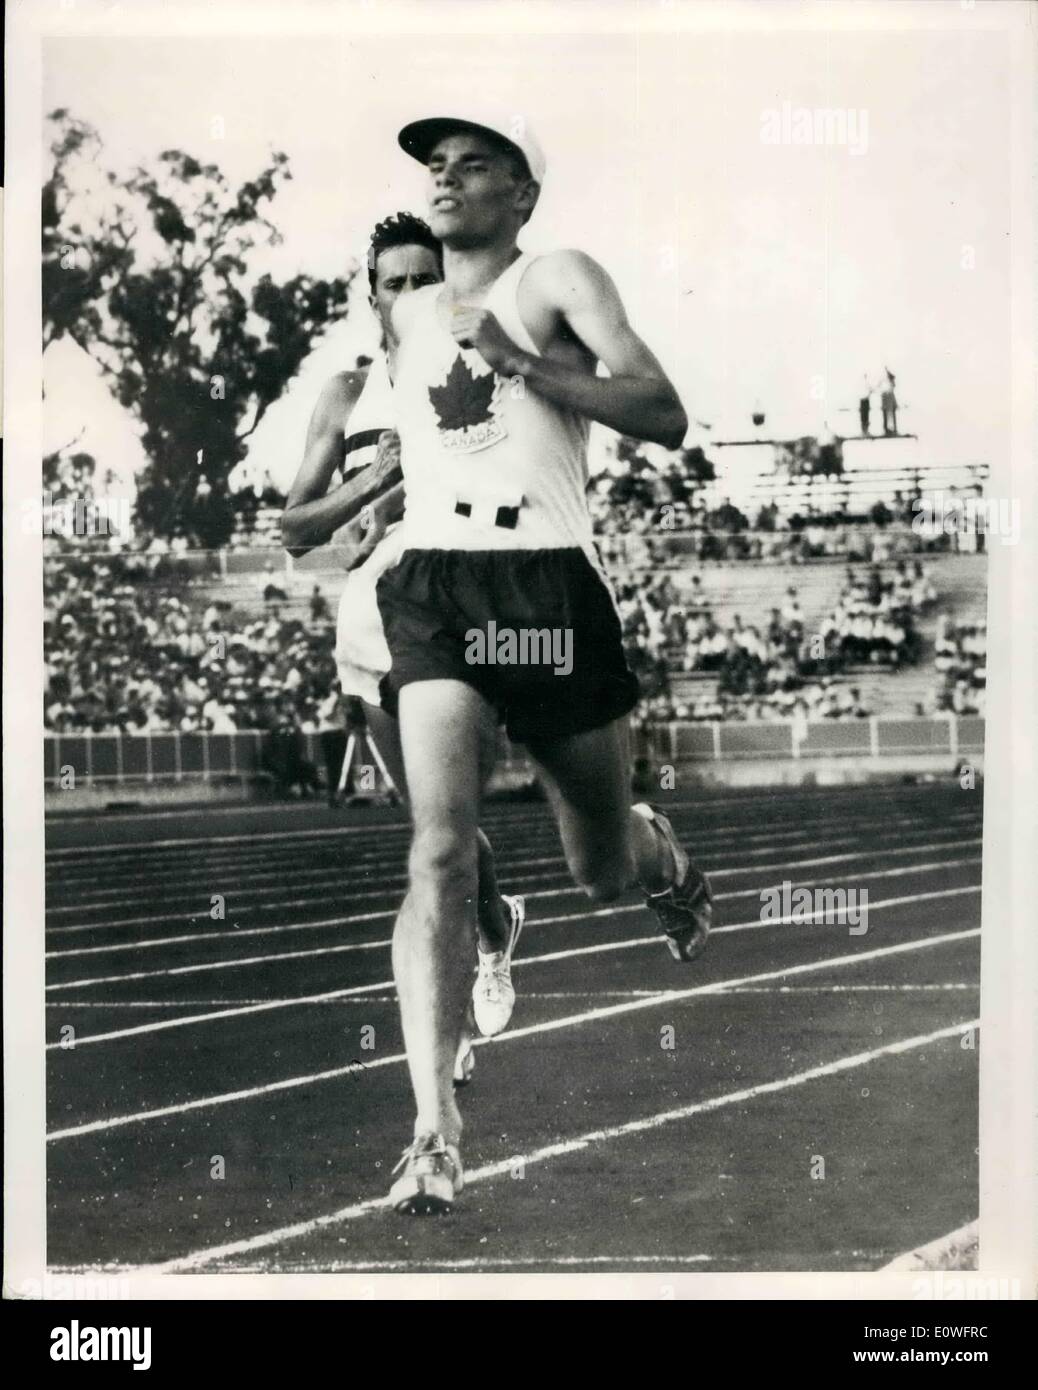 Nov. 11, 1962 - Canadian wins six-mile event at Perth: Photo shows wearing a white peaked cap, Bruce Kidd, of Canada, crosses the line to tin the six-mile event at the British Empire and Commonwealth Games at Perth in the record time of 28 minutes 26.6 seocnds. Stock Photo